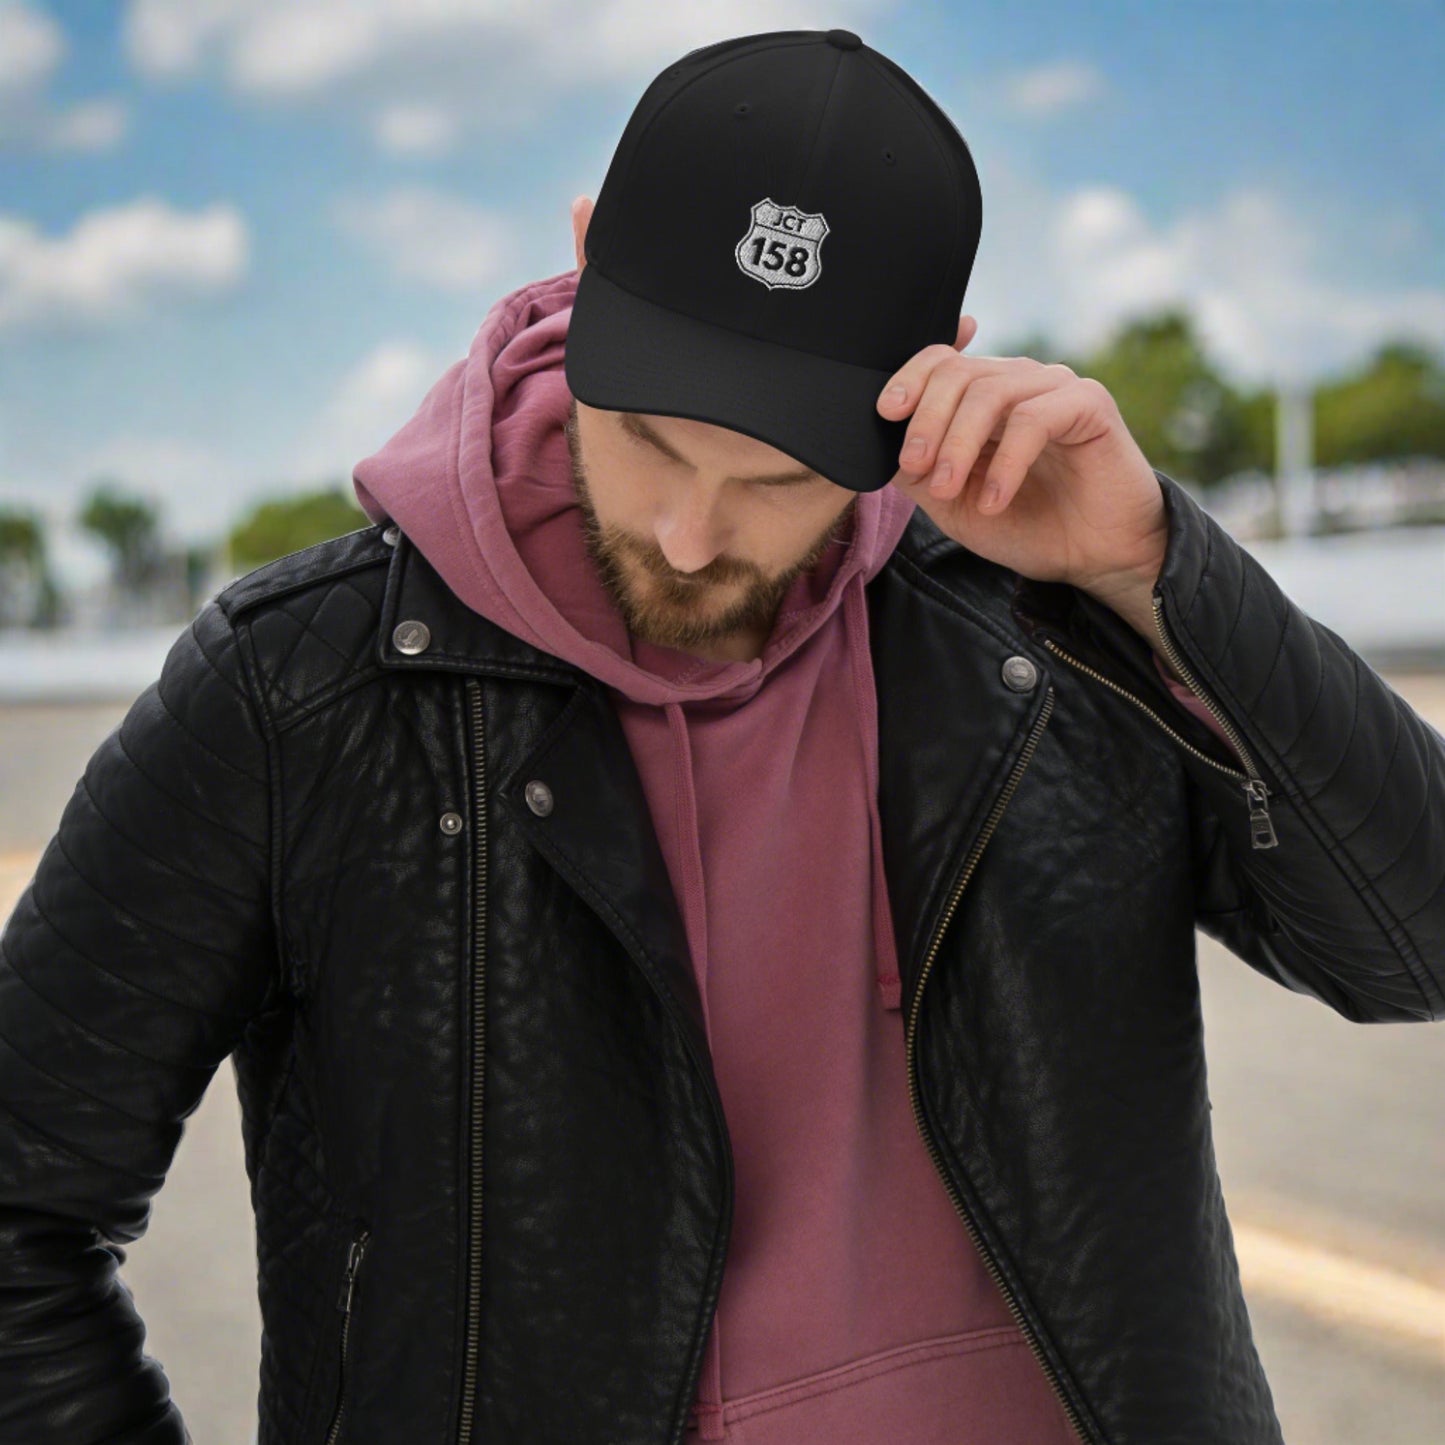 Junction 158 Fitted Hat